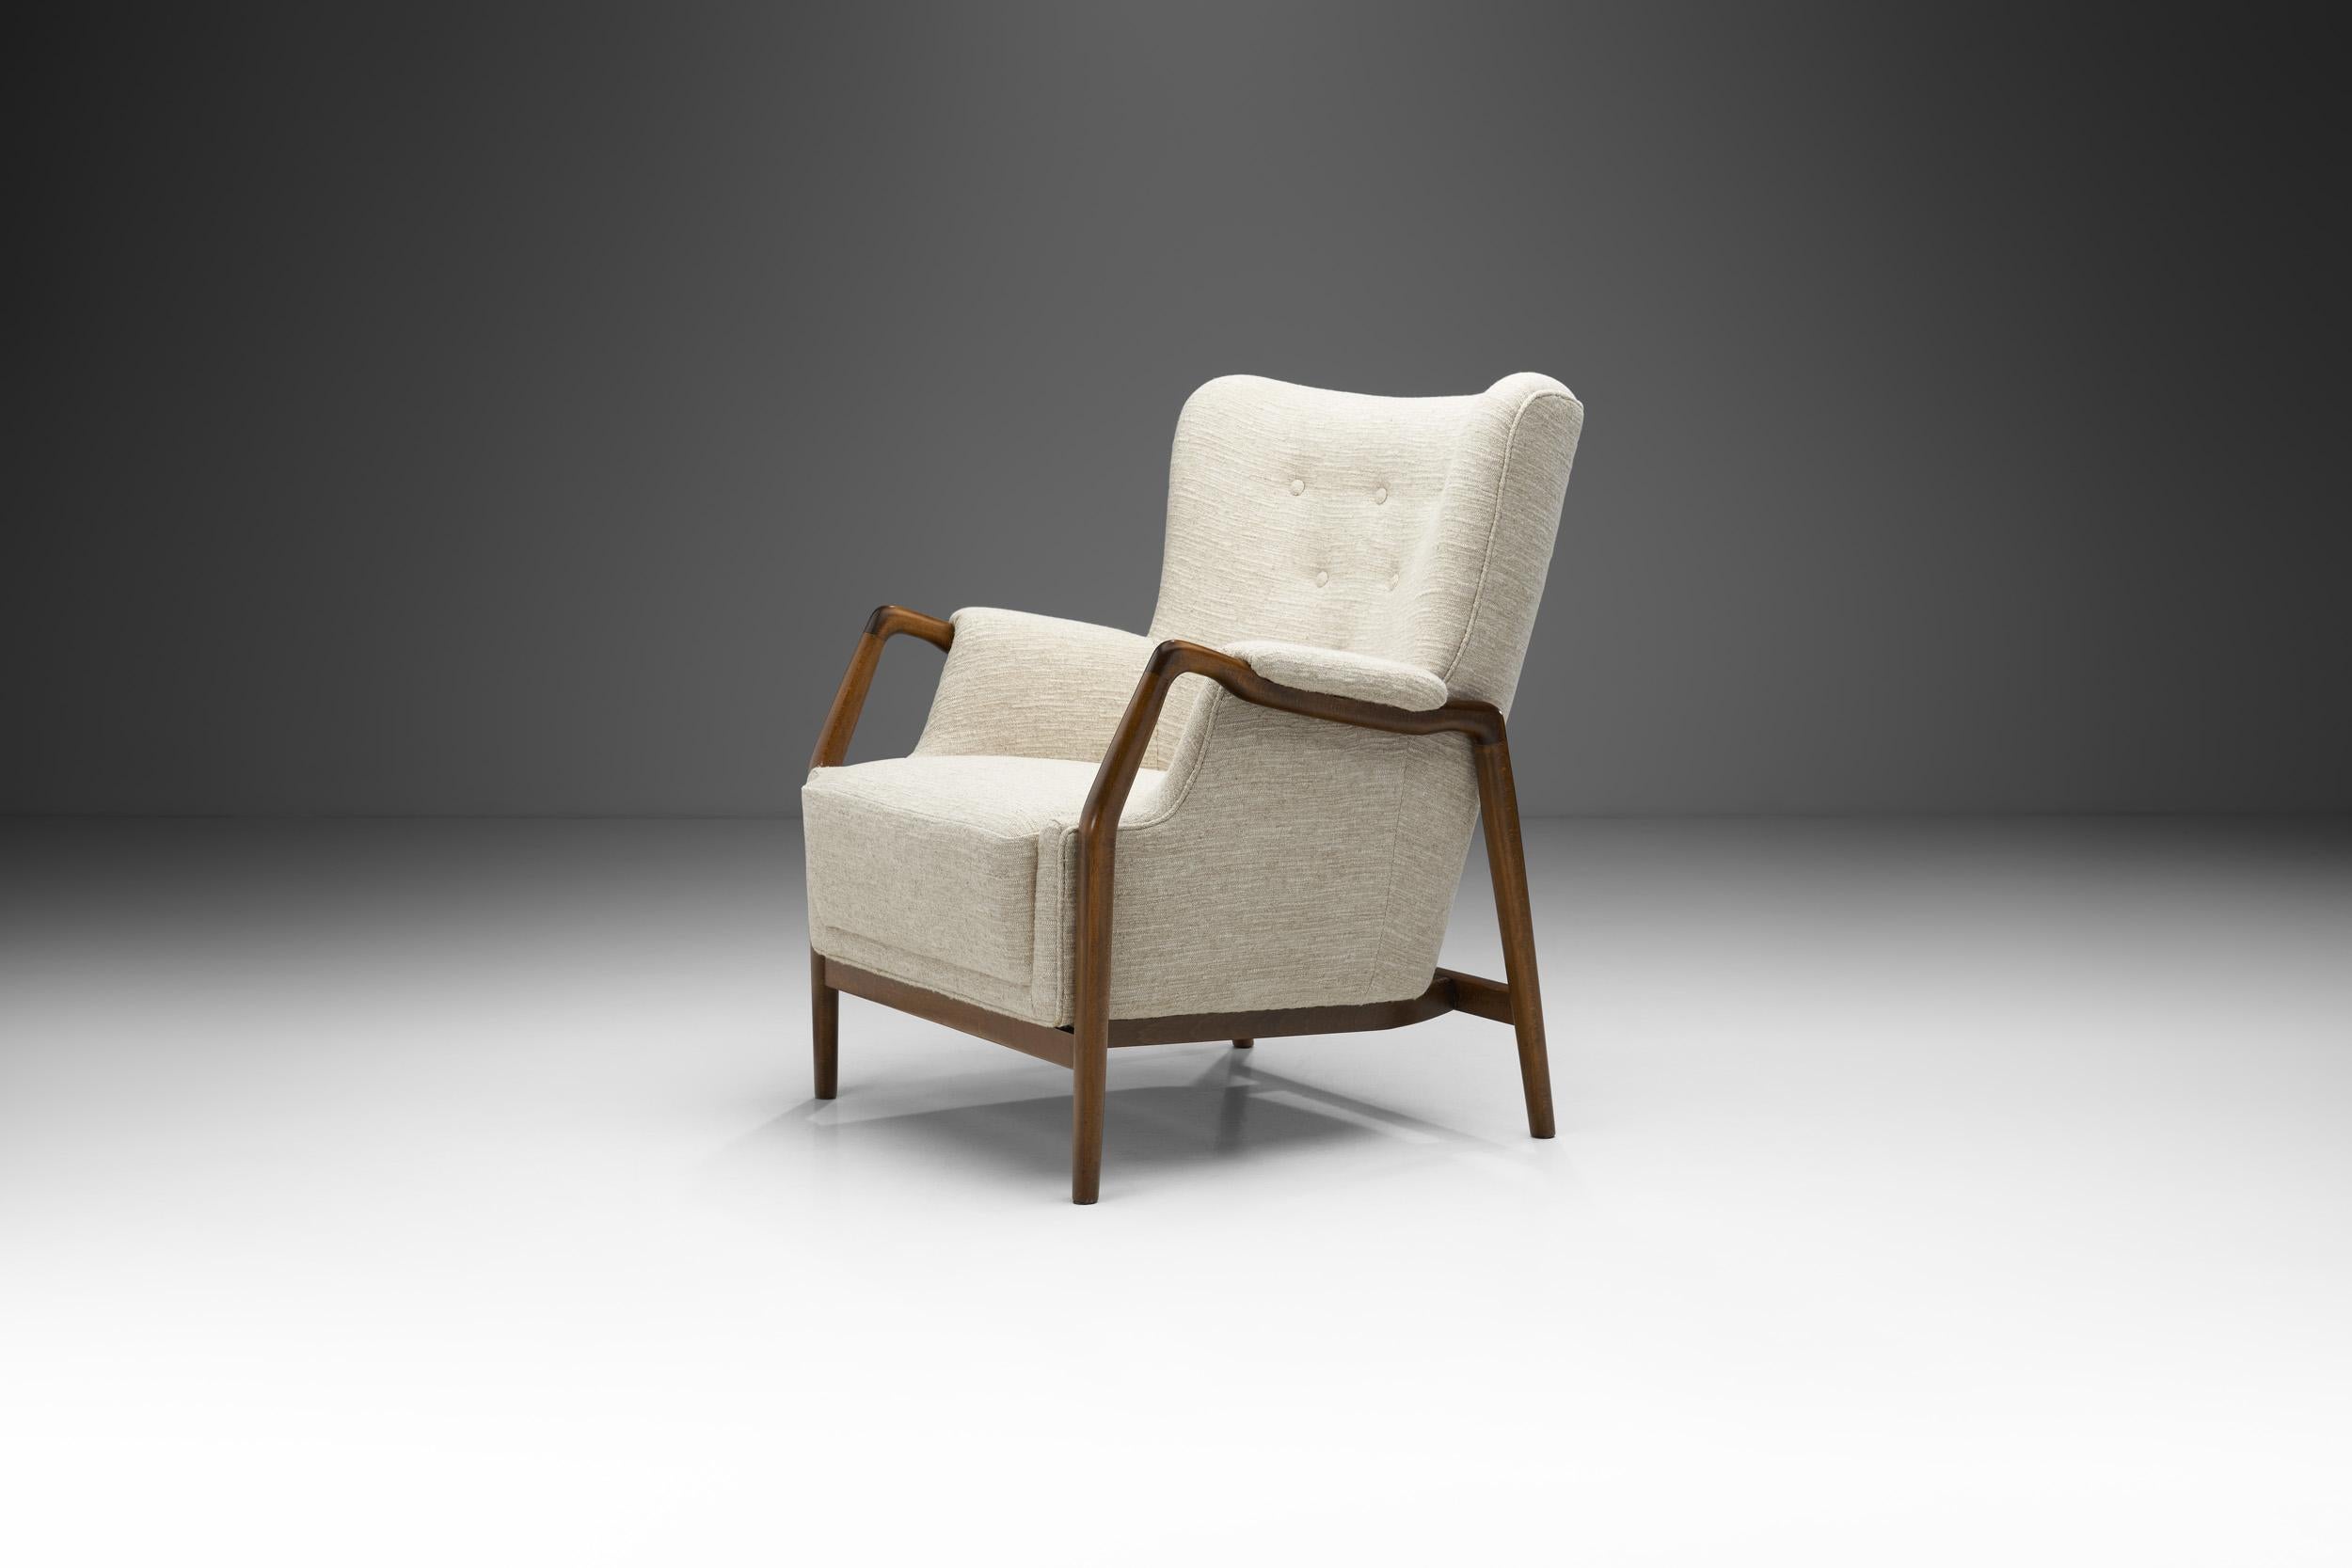 This rare “Model 214” armchair was designed by Danish designer and architect Kurt Olsen, and unifies some of the best characteristics of mid-century Danish design and craftsmanship.

The unique design of this chair is in big part thanks to Olsen’s